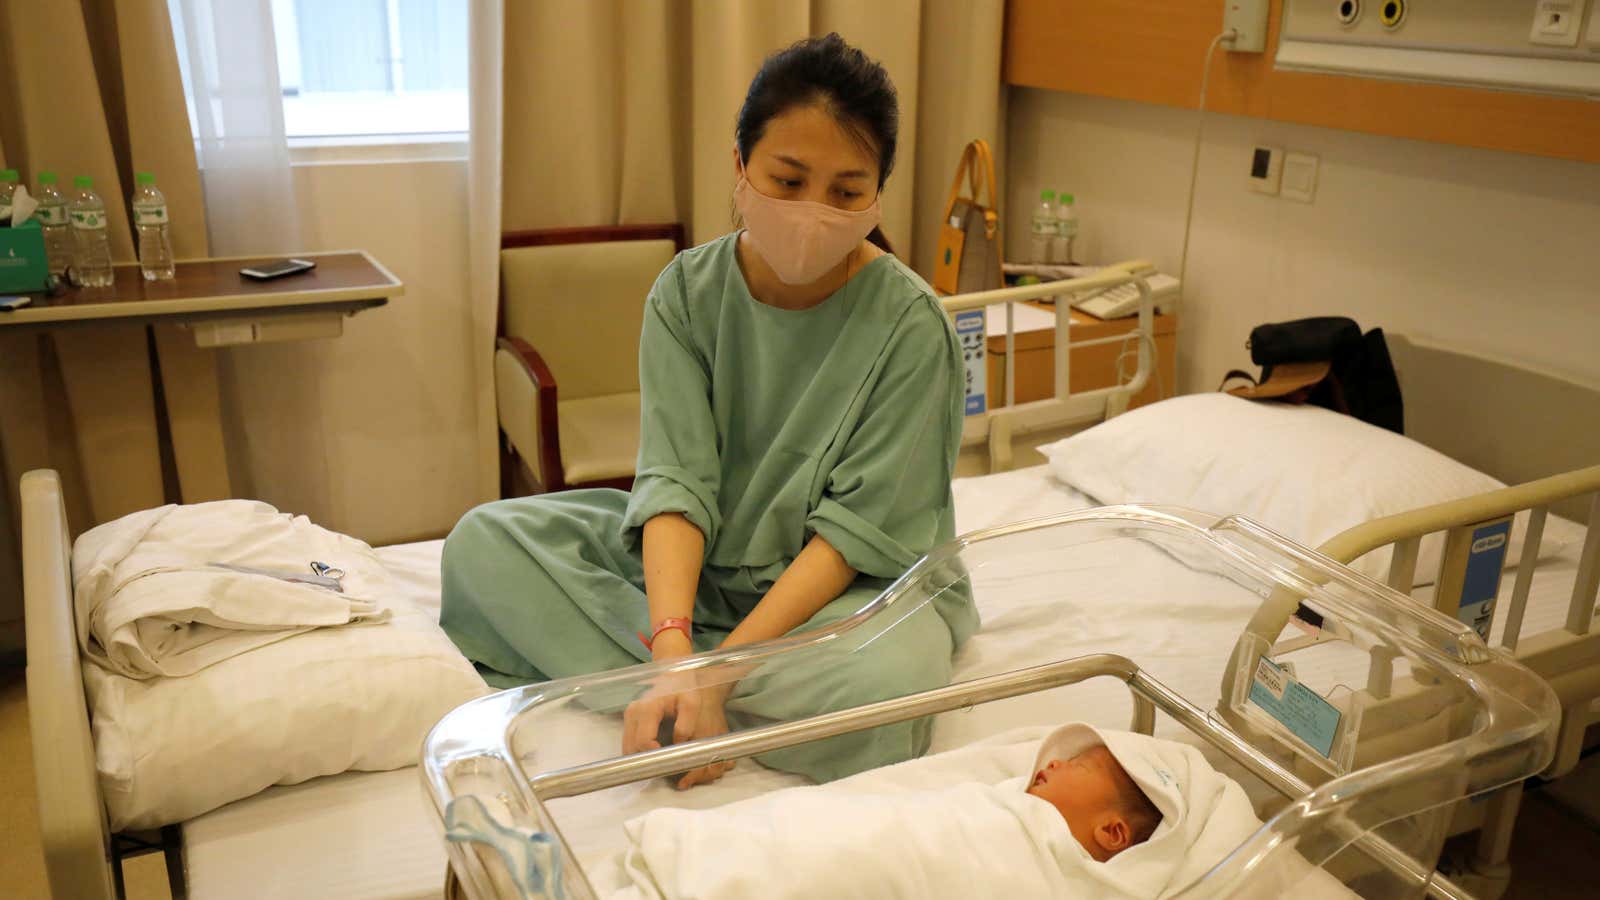 Getting a Covid-19 vaccine during pregnancy is even more urgent now as ICU beds fill up.